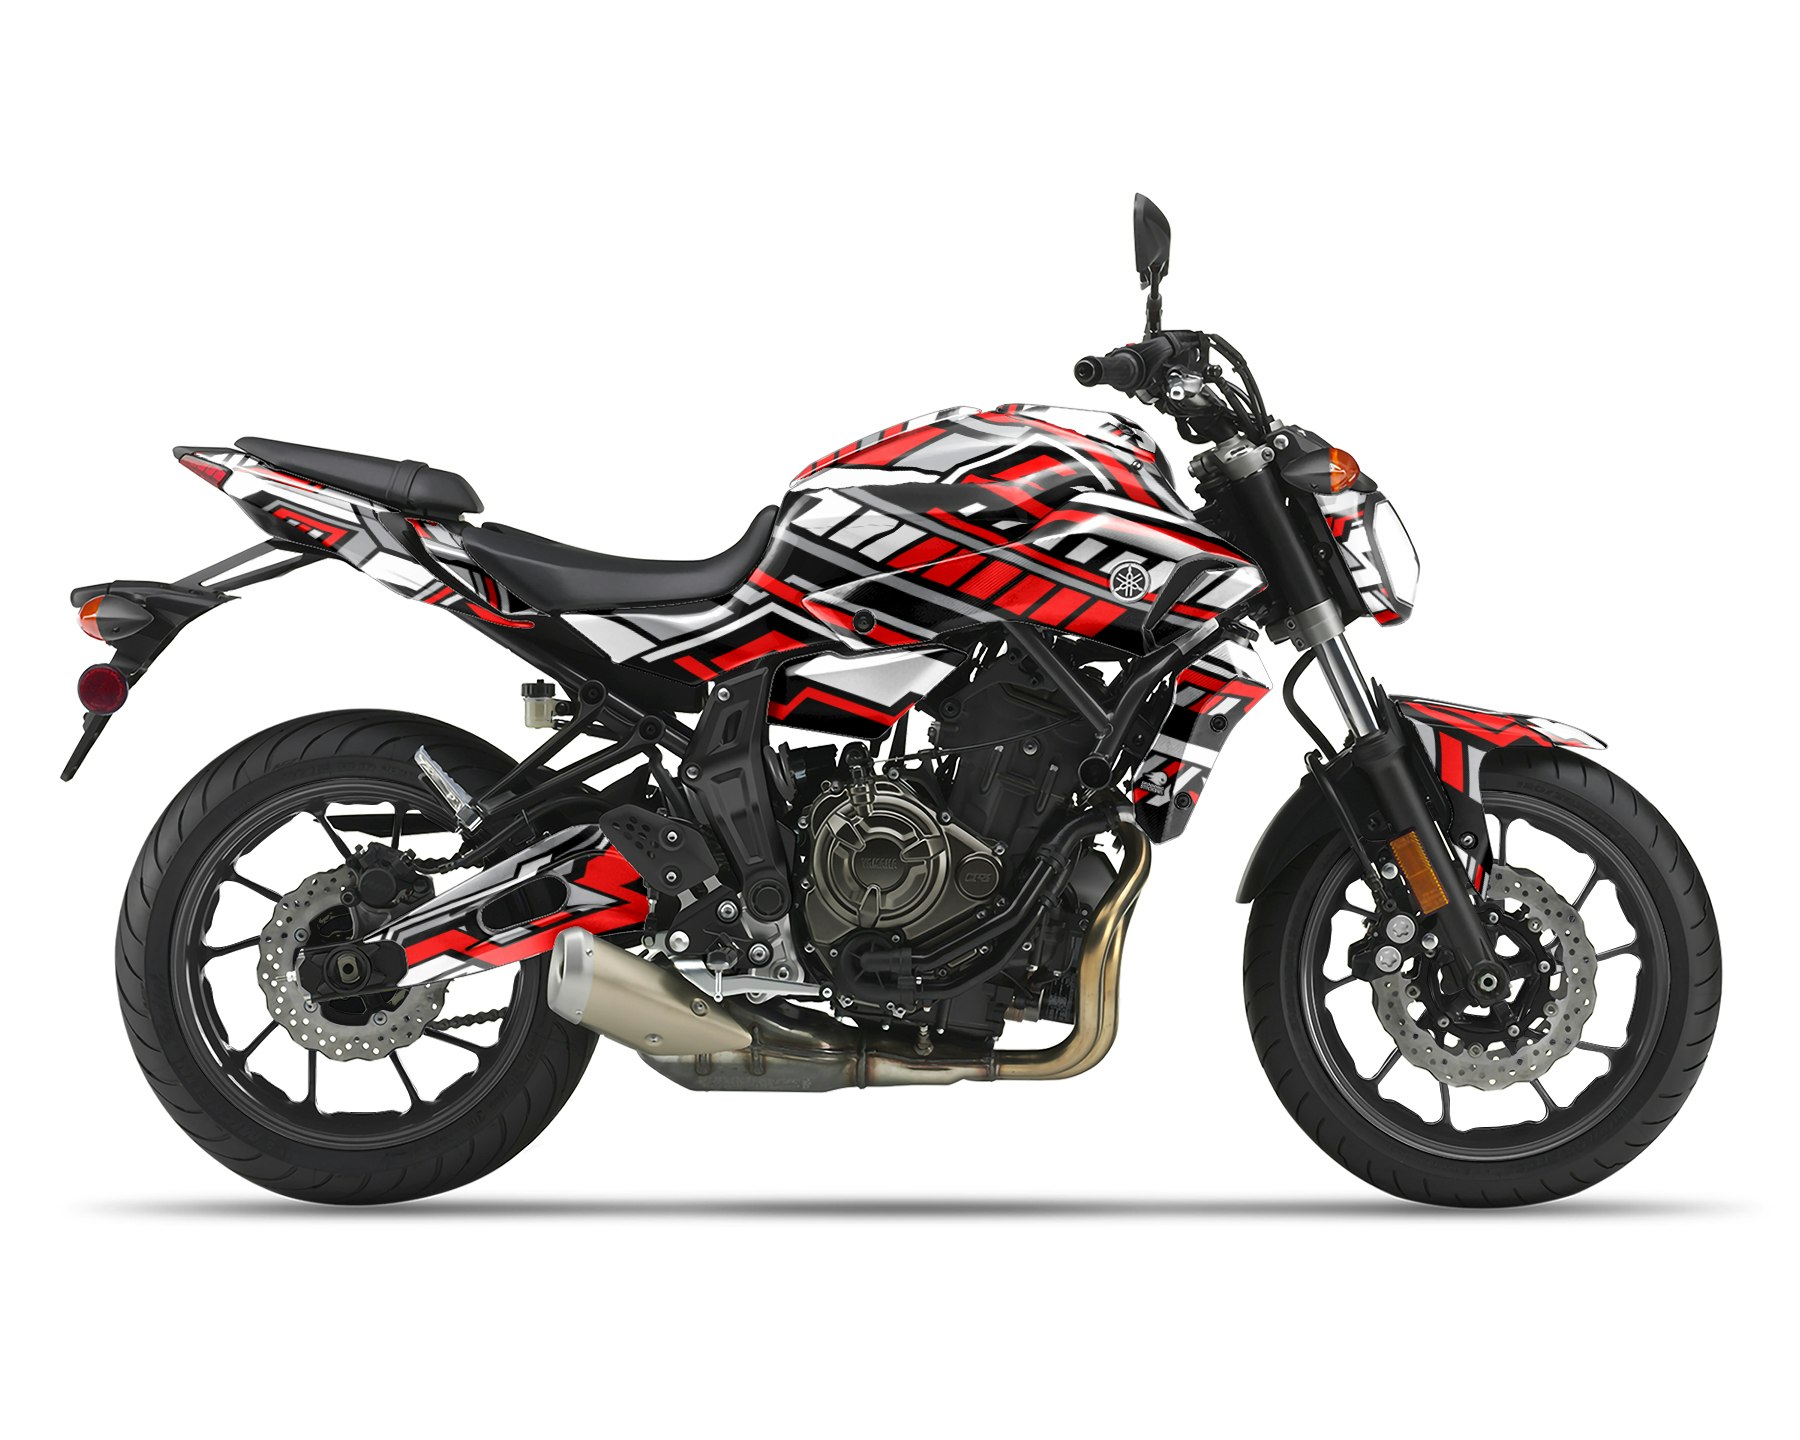 Yamaha MT-07 Motorcycle with Red and white fairing stickers